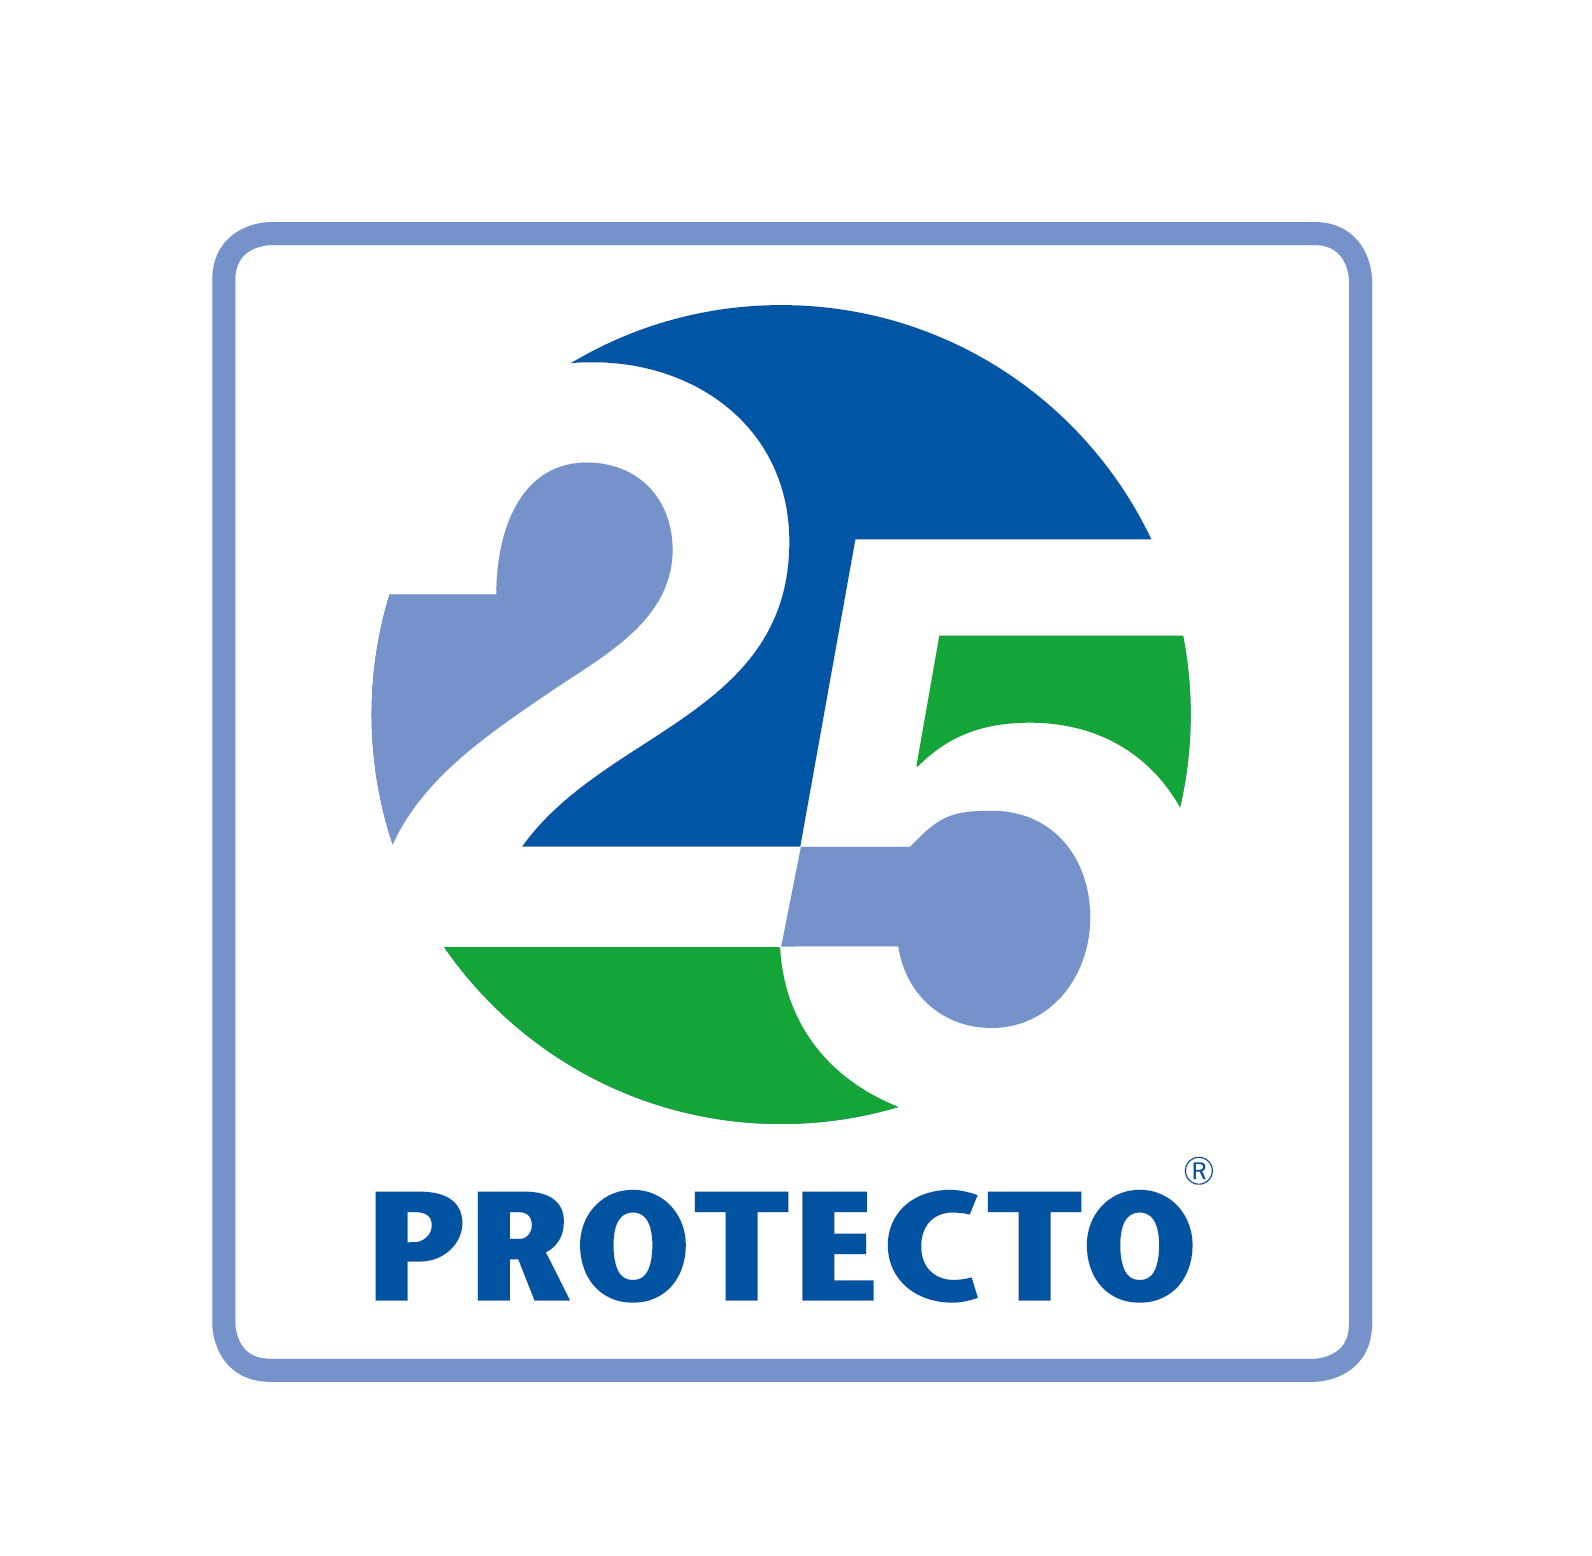 25 years of PROTECTO safe storage